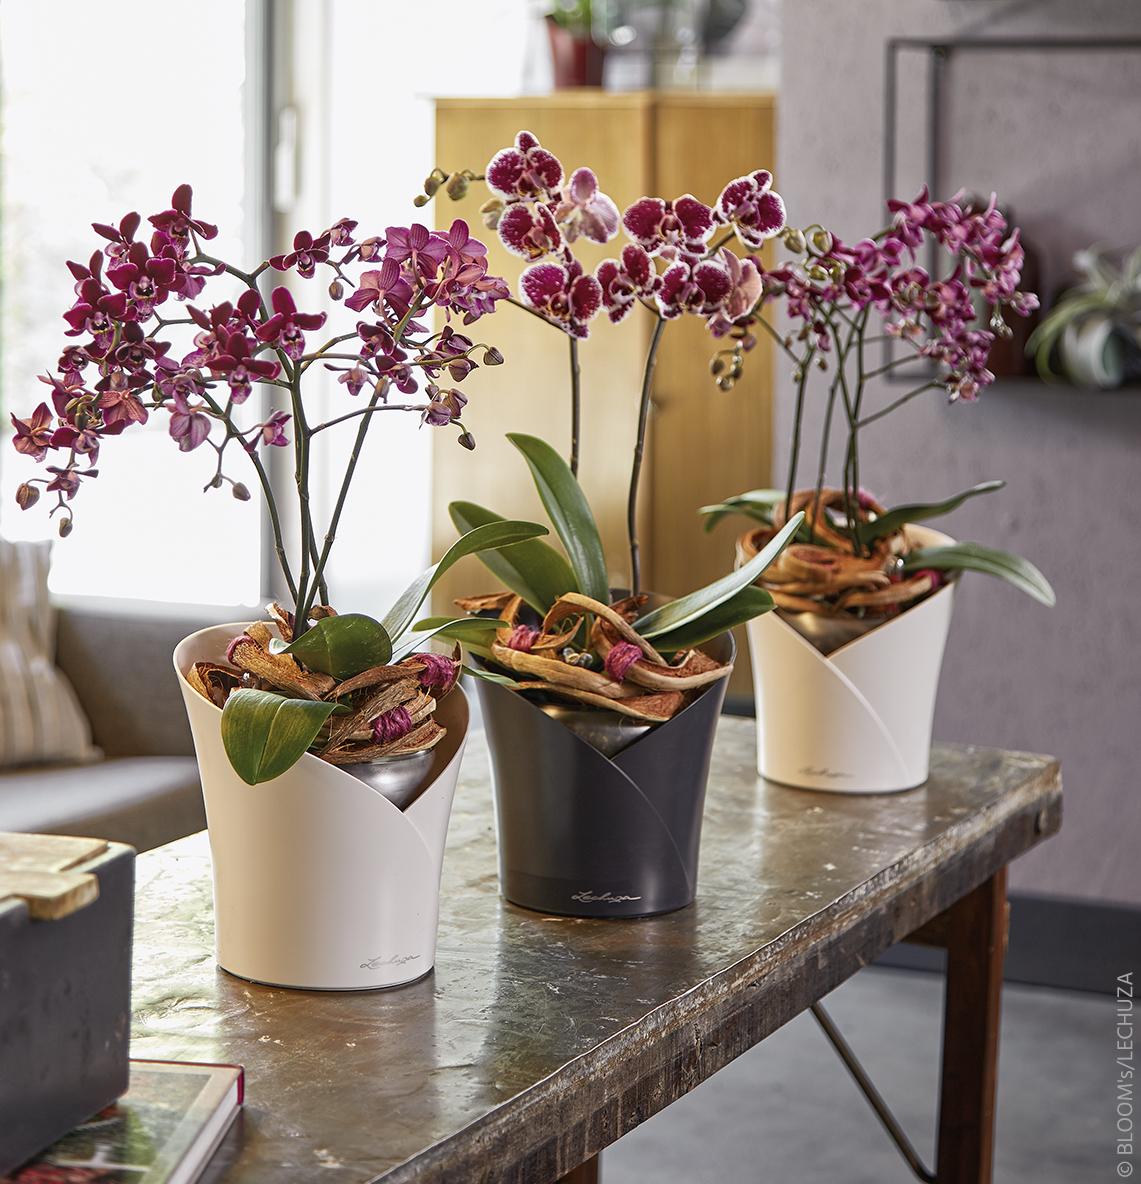 'ORCHIDEA is the planter from LECHUZA that’s perfect for meeting the high demands of Phalaenopsis